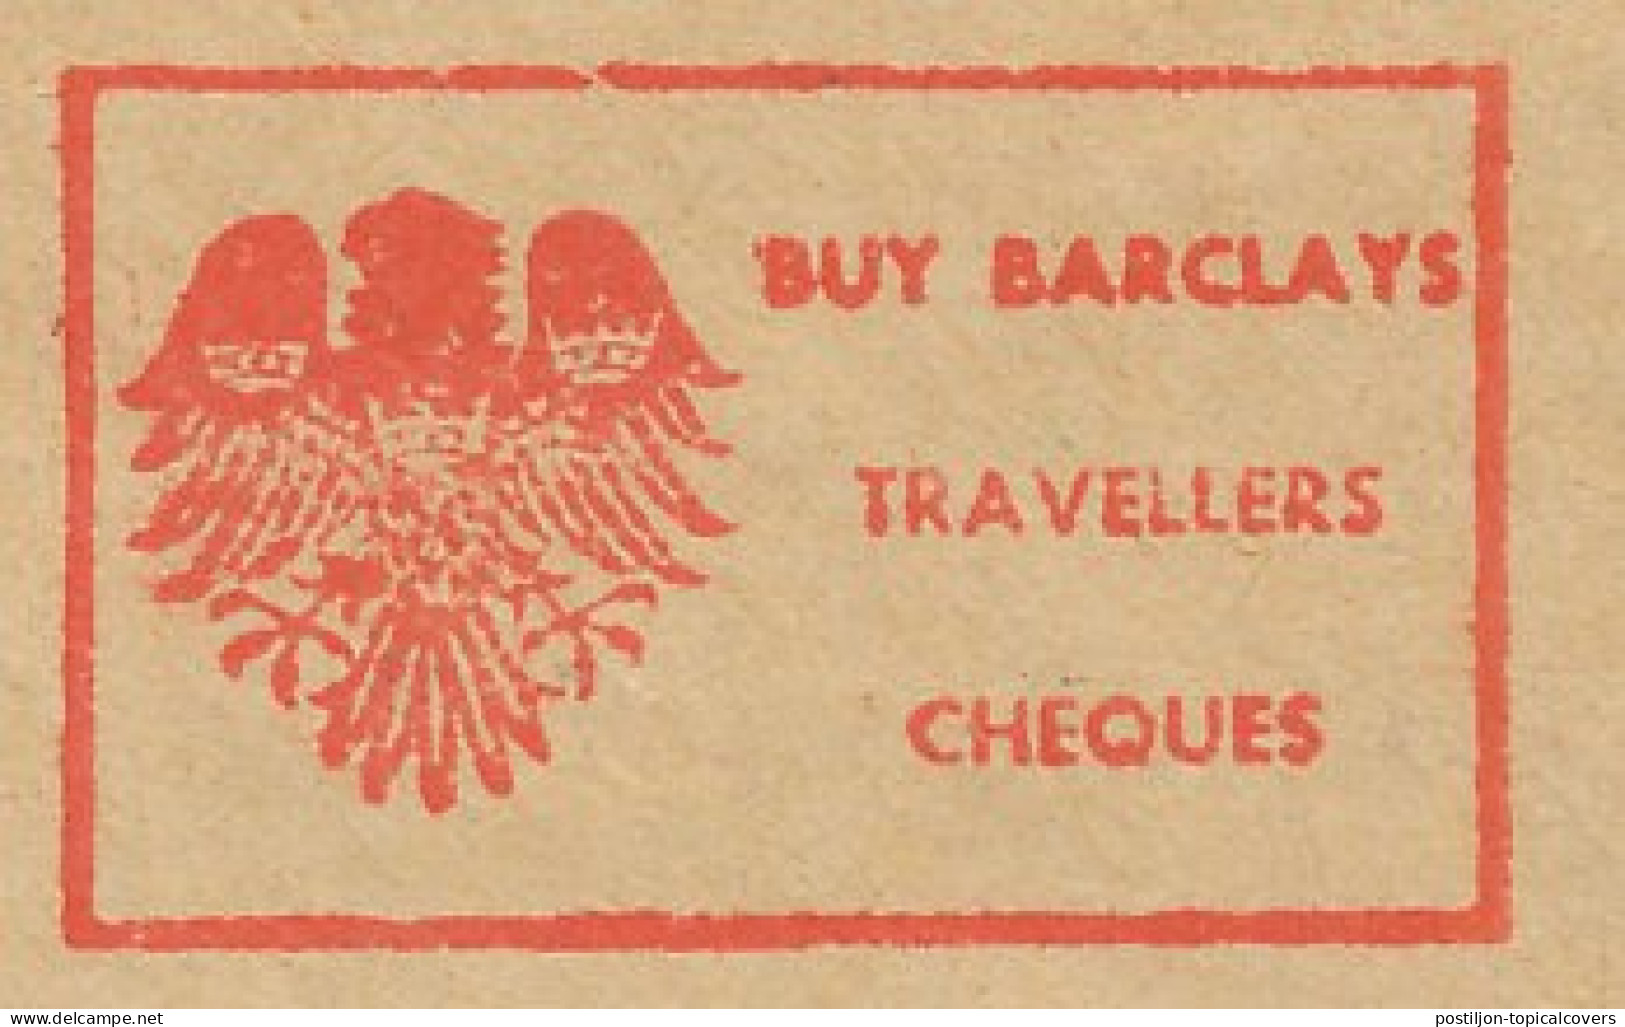 Meter Cut Cyprus 1984 Travellers Cheques - Barclays - Unclassified